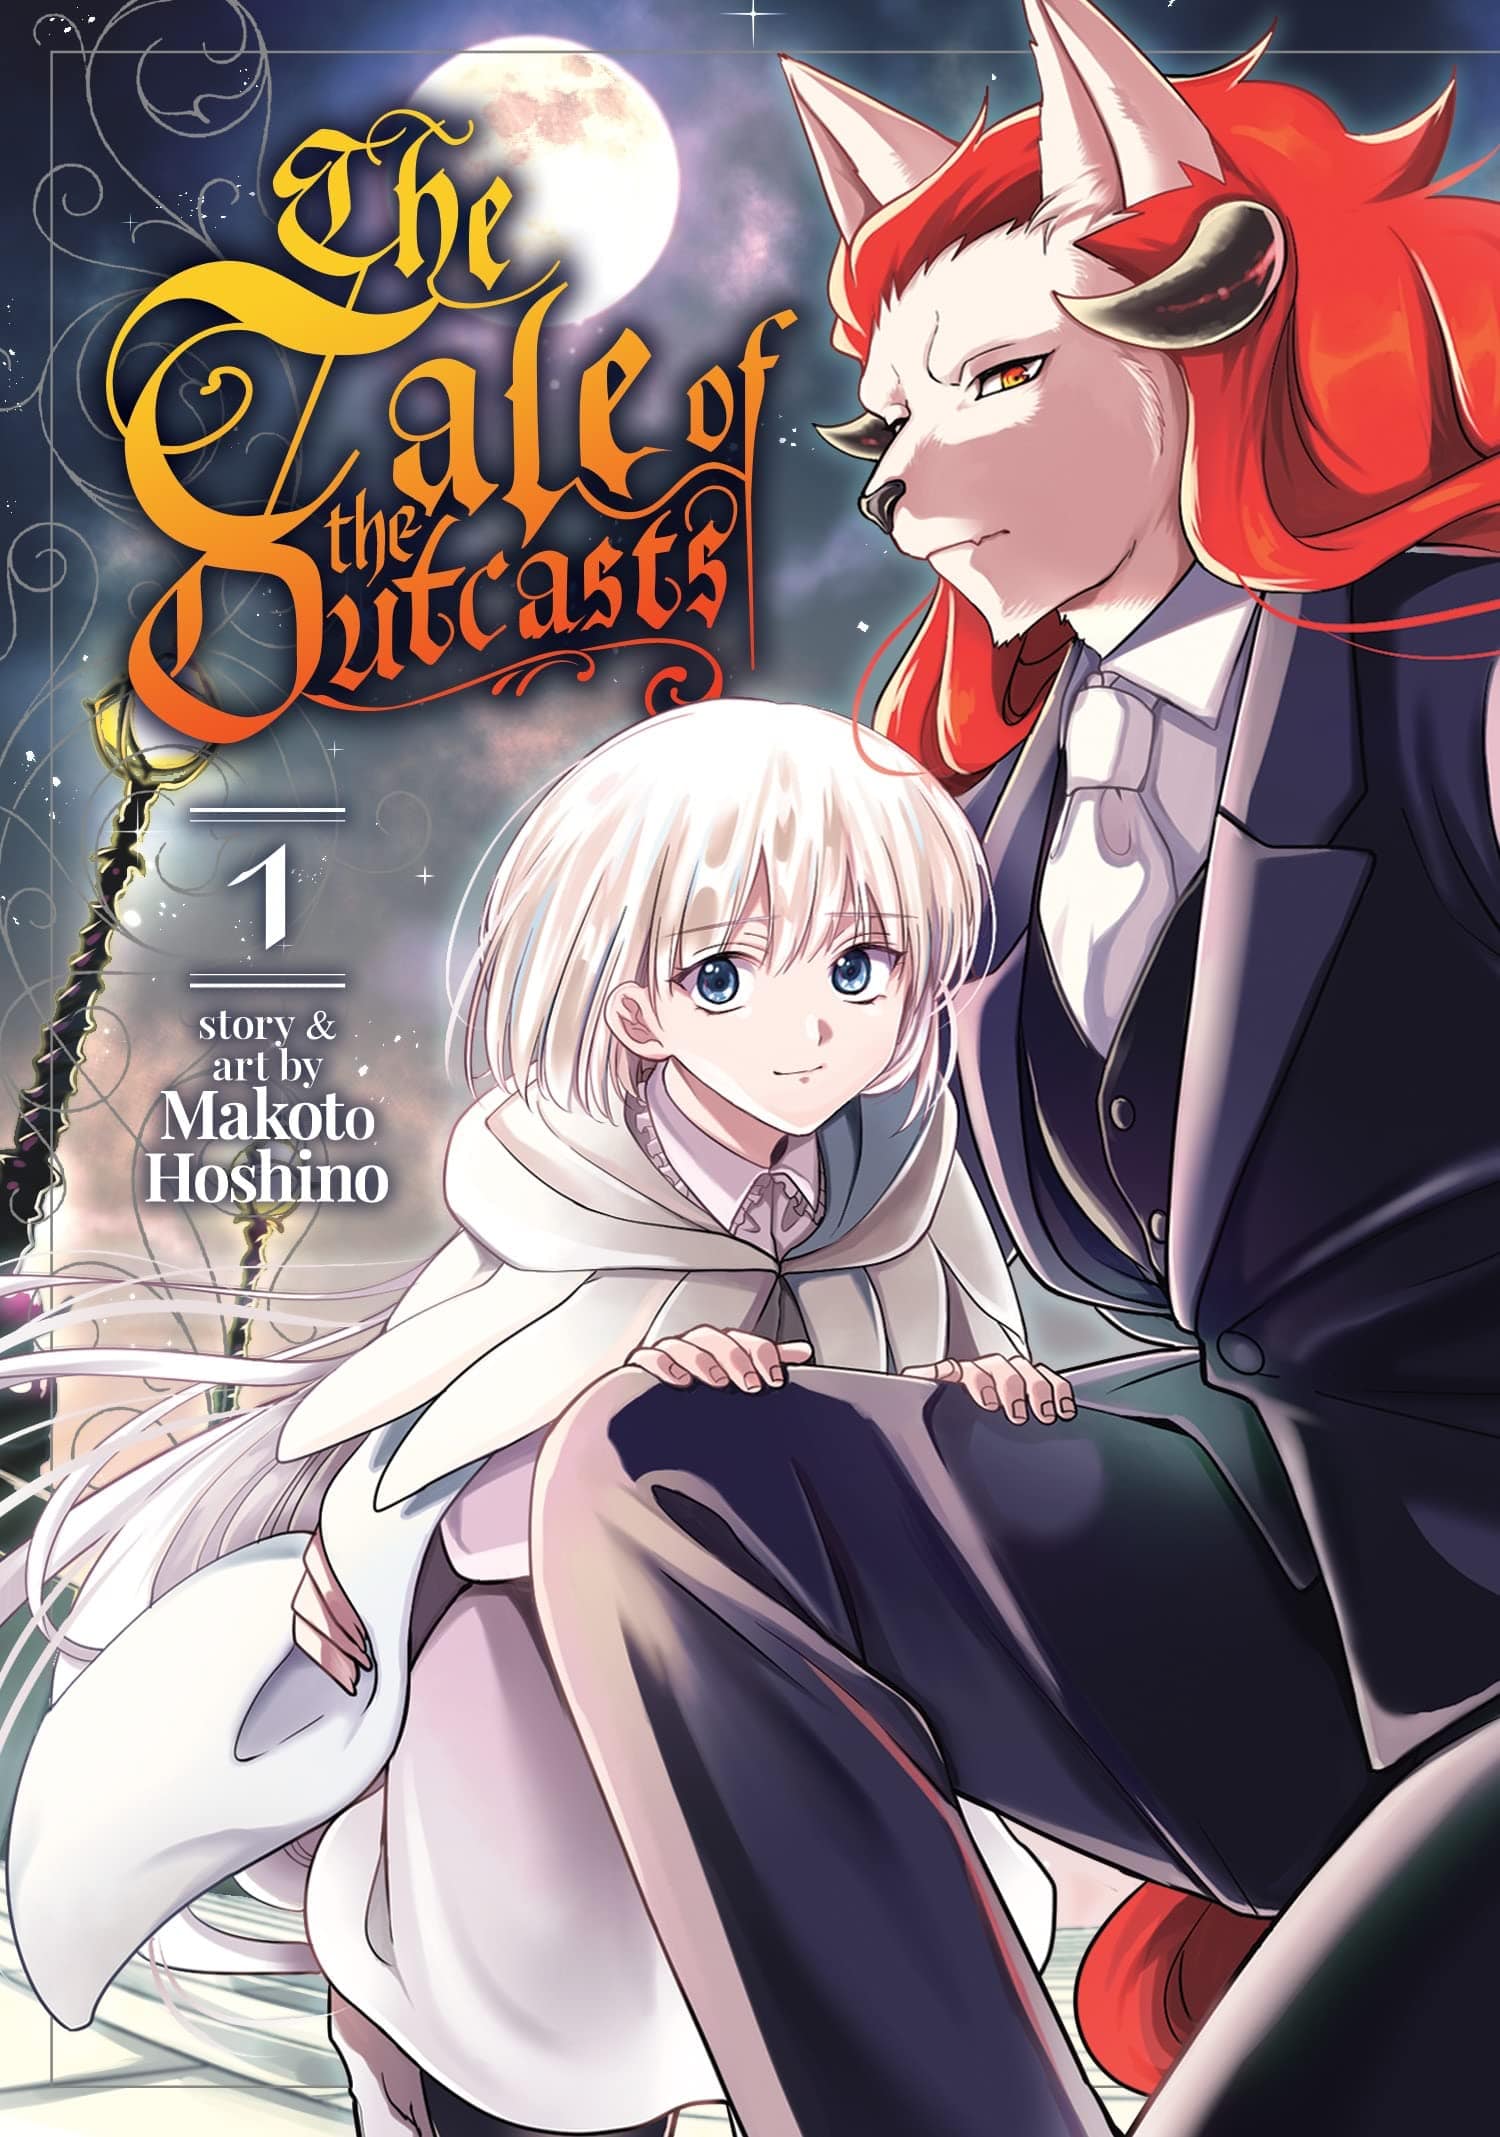 Tale of the Outcasts Vol. 1 - Third Eye